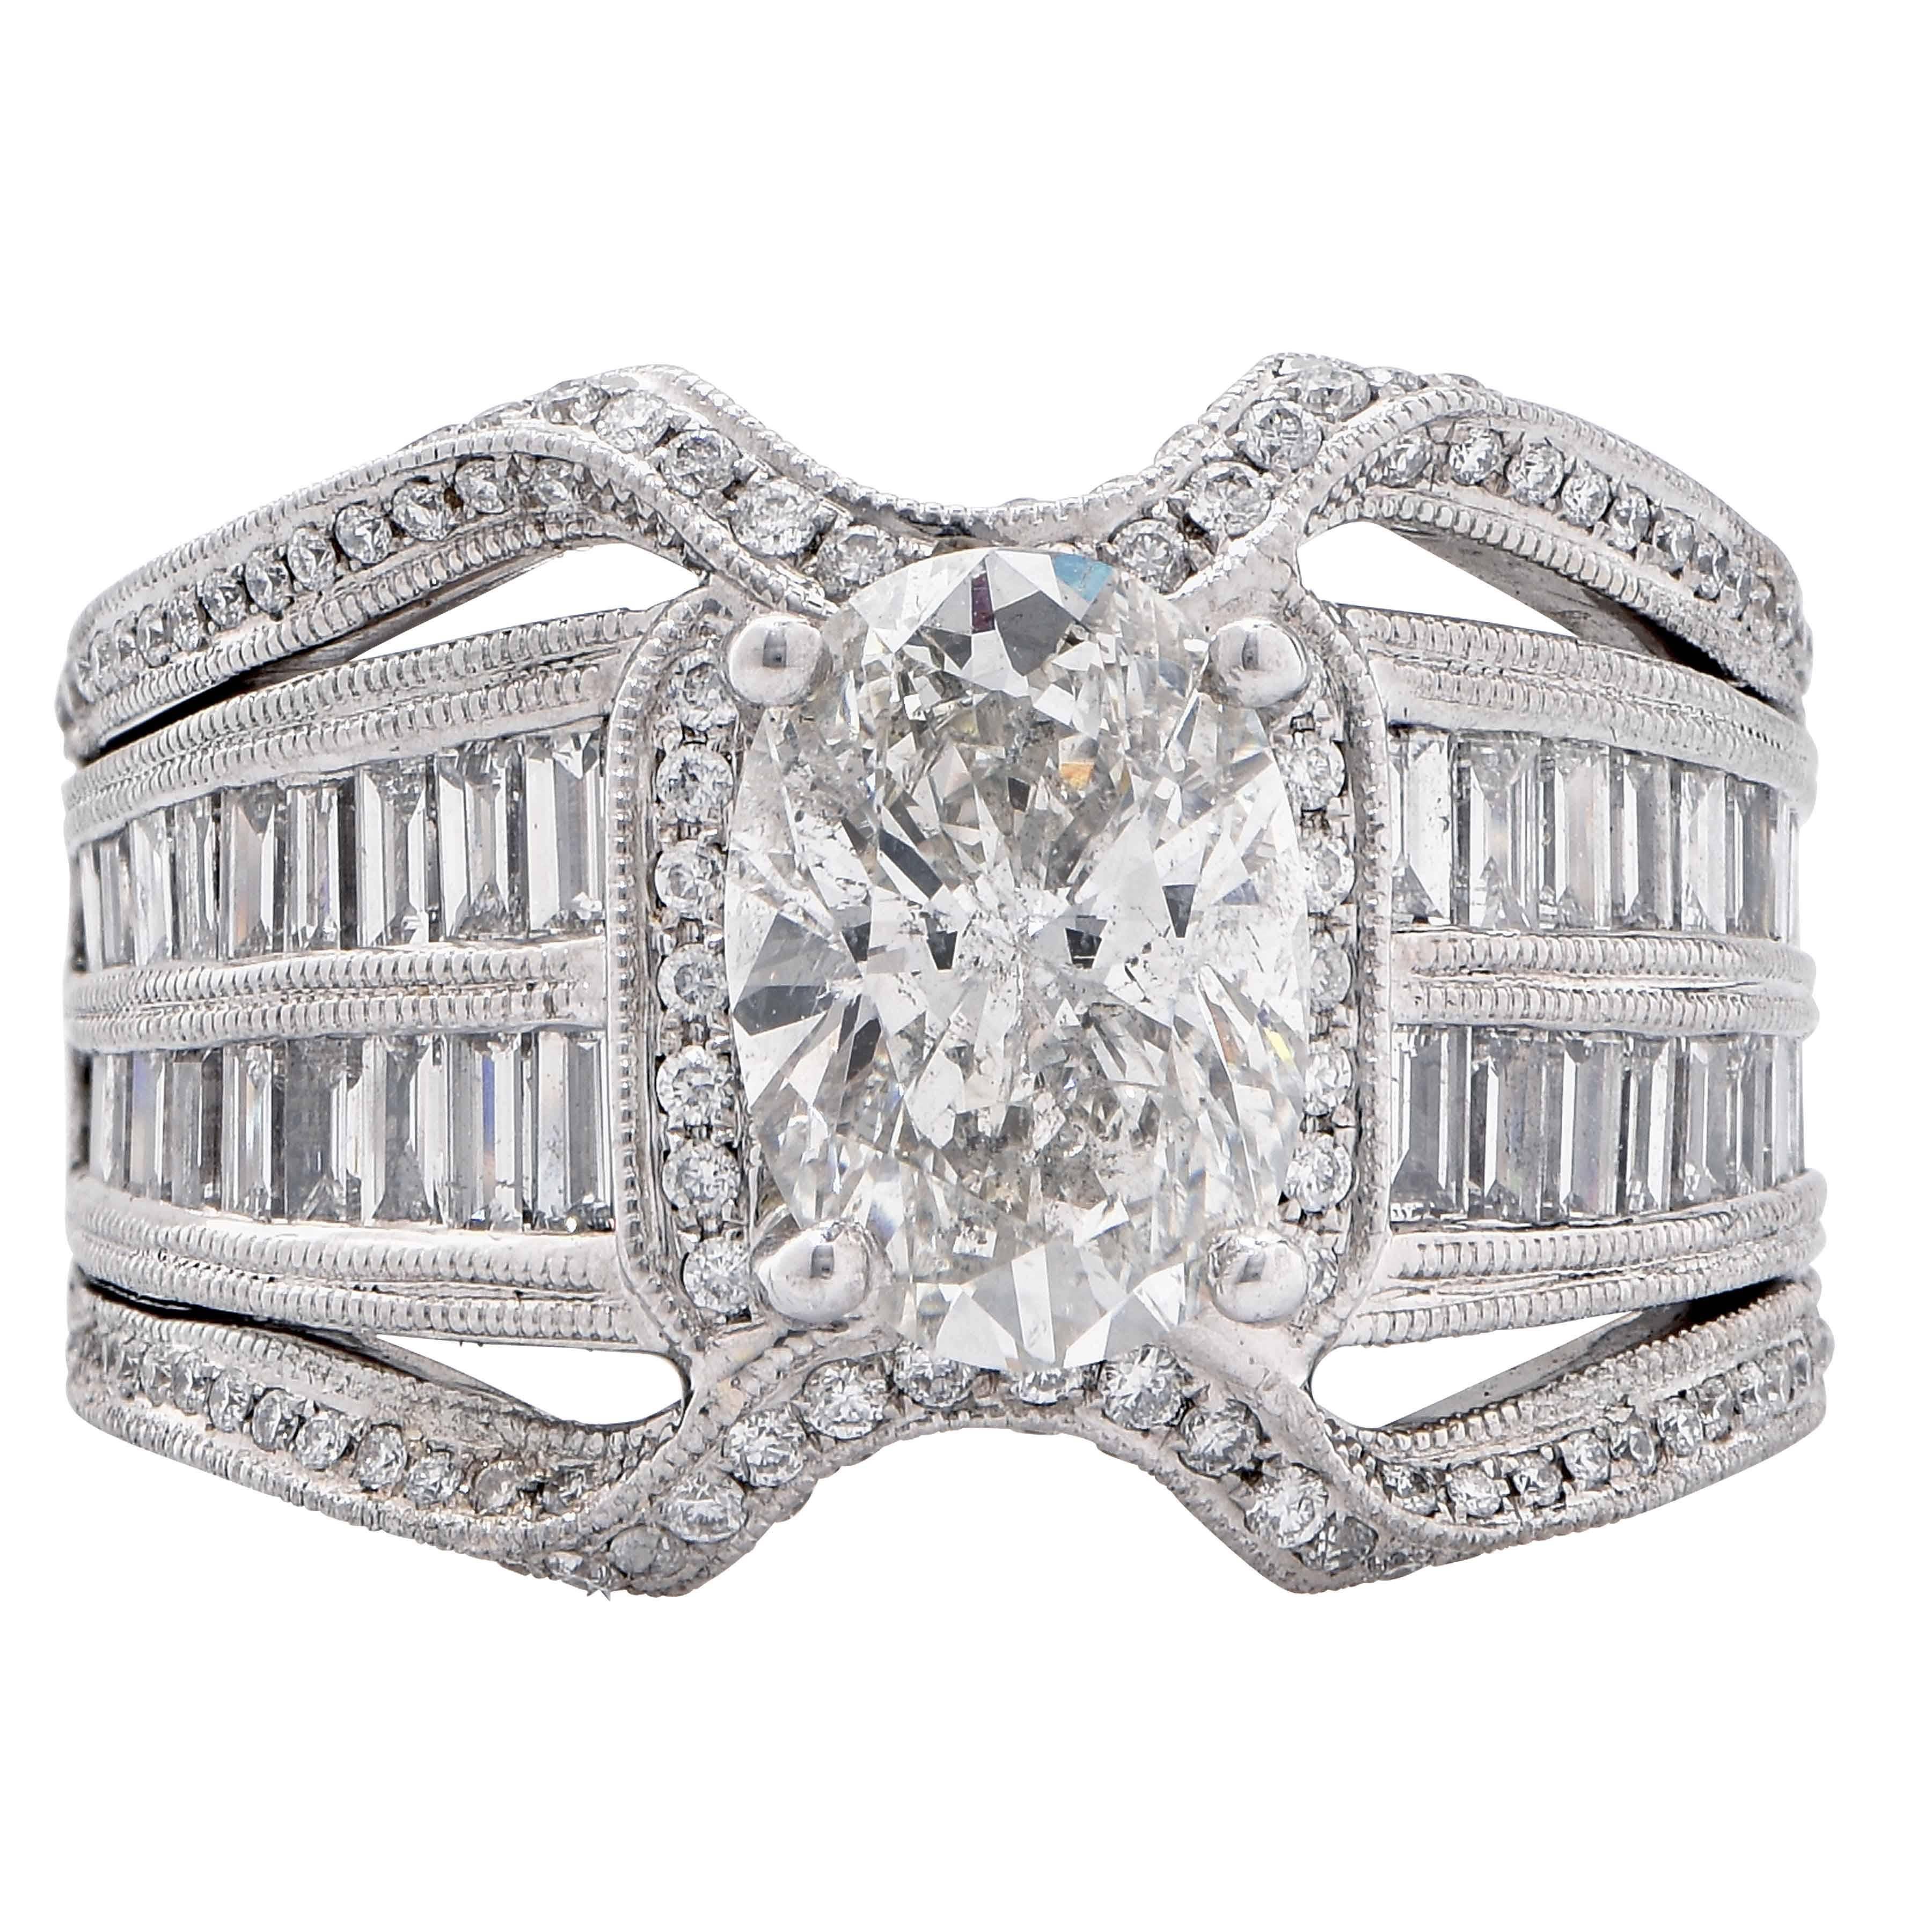 This lively 18 Karat White Gold Cocktail ring features 1.3 Carats of mix cut diamonds and a center 2.03 Carat Oval Cut Diamond GIA Graded J/ I1.
Ring Size 6 (can be sized)

Metal Type: 18 Kt White Gold
Metal Weight: 11.5 Grams